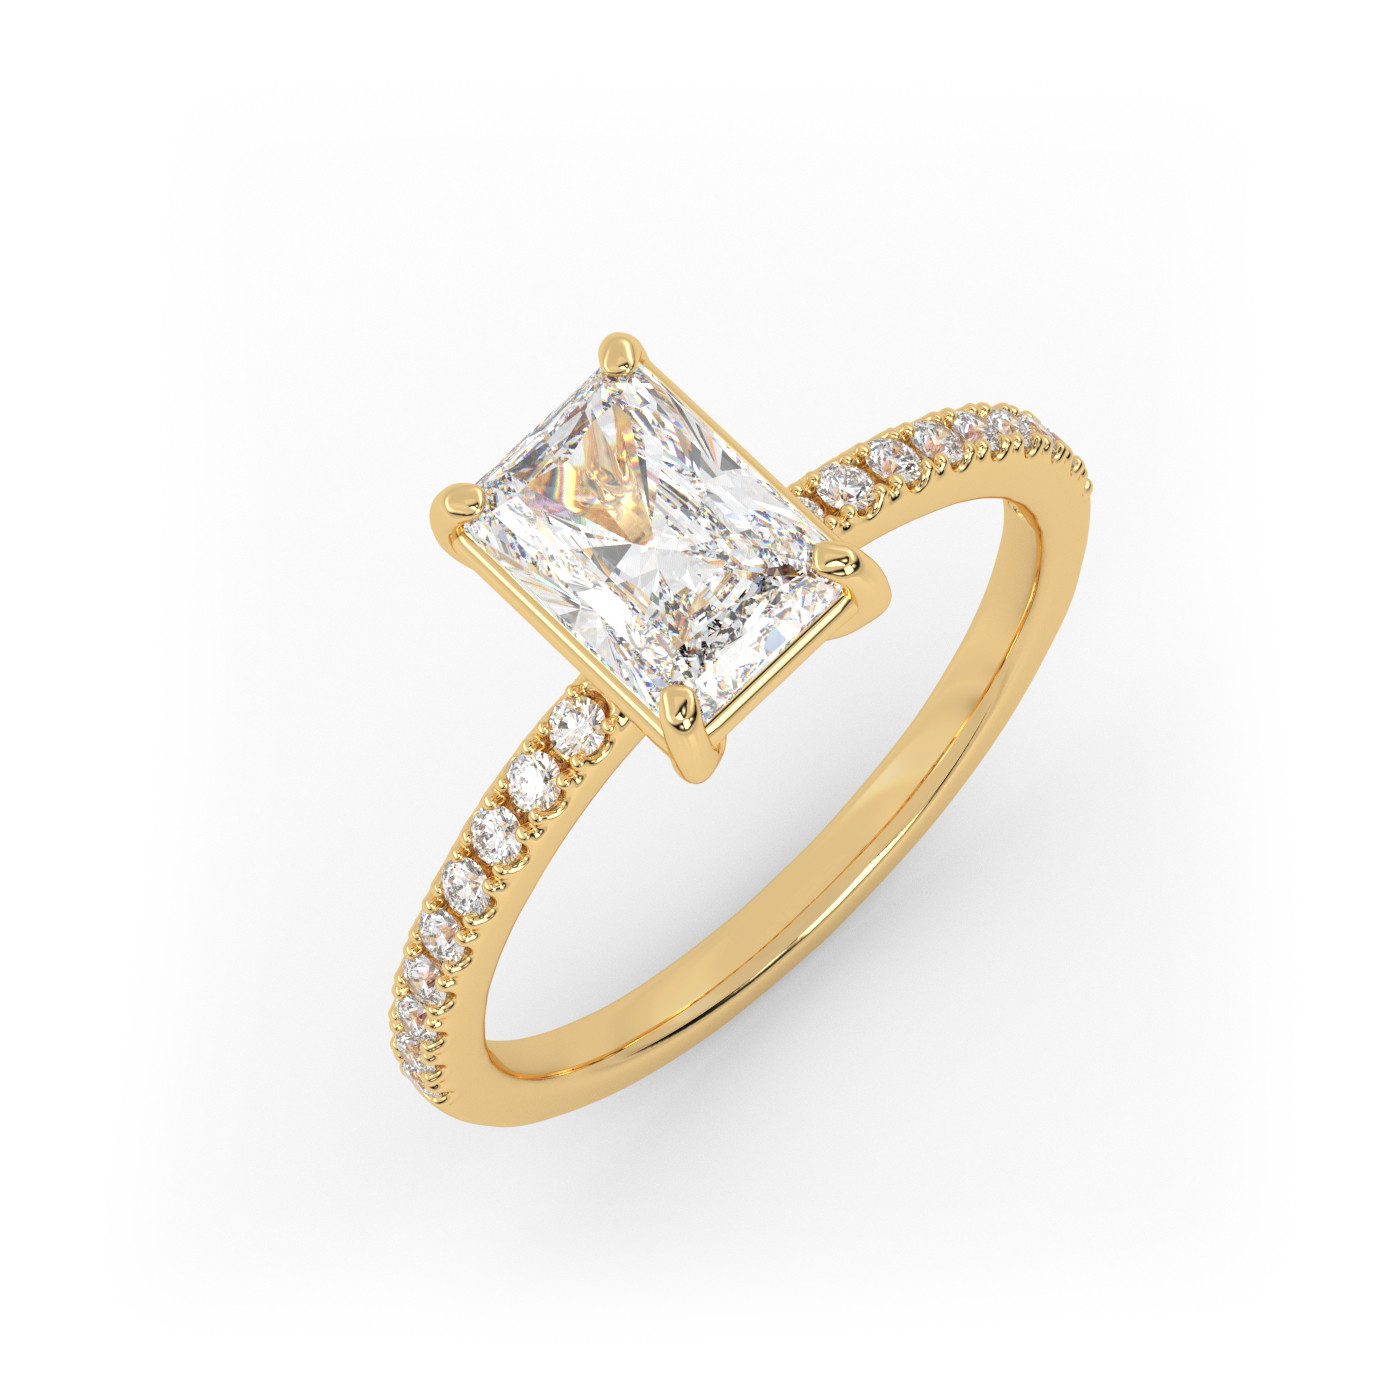 18K YELLOW GOLD Radiant Diamond Cut Solitaire Engagement Ring with Pave Band.